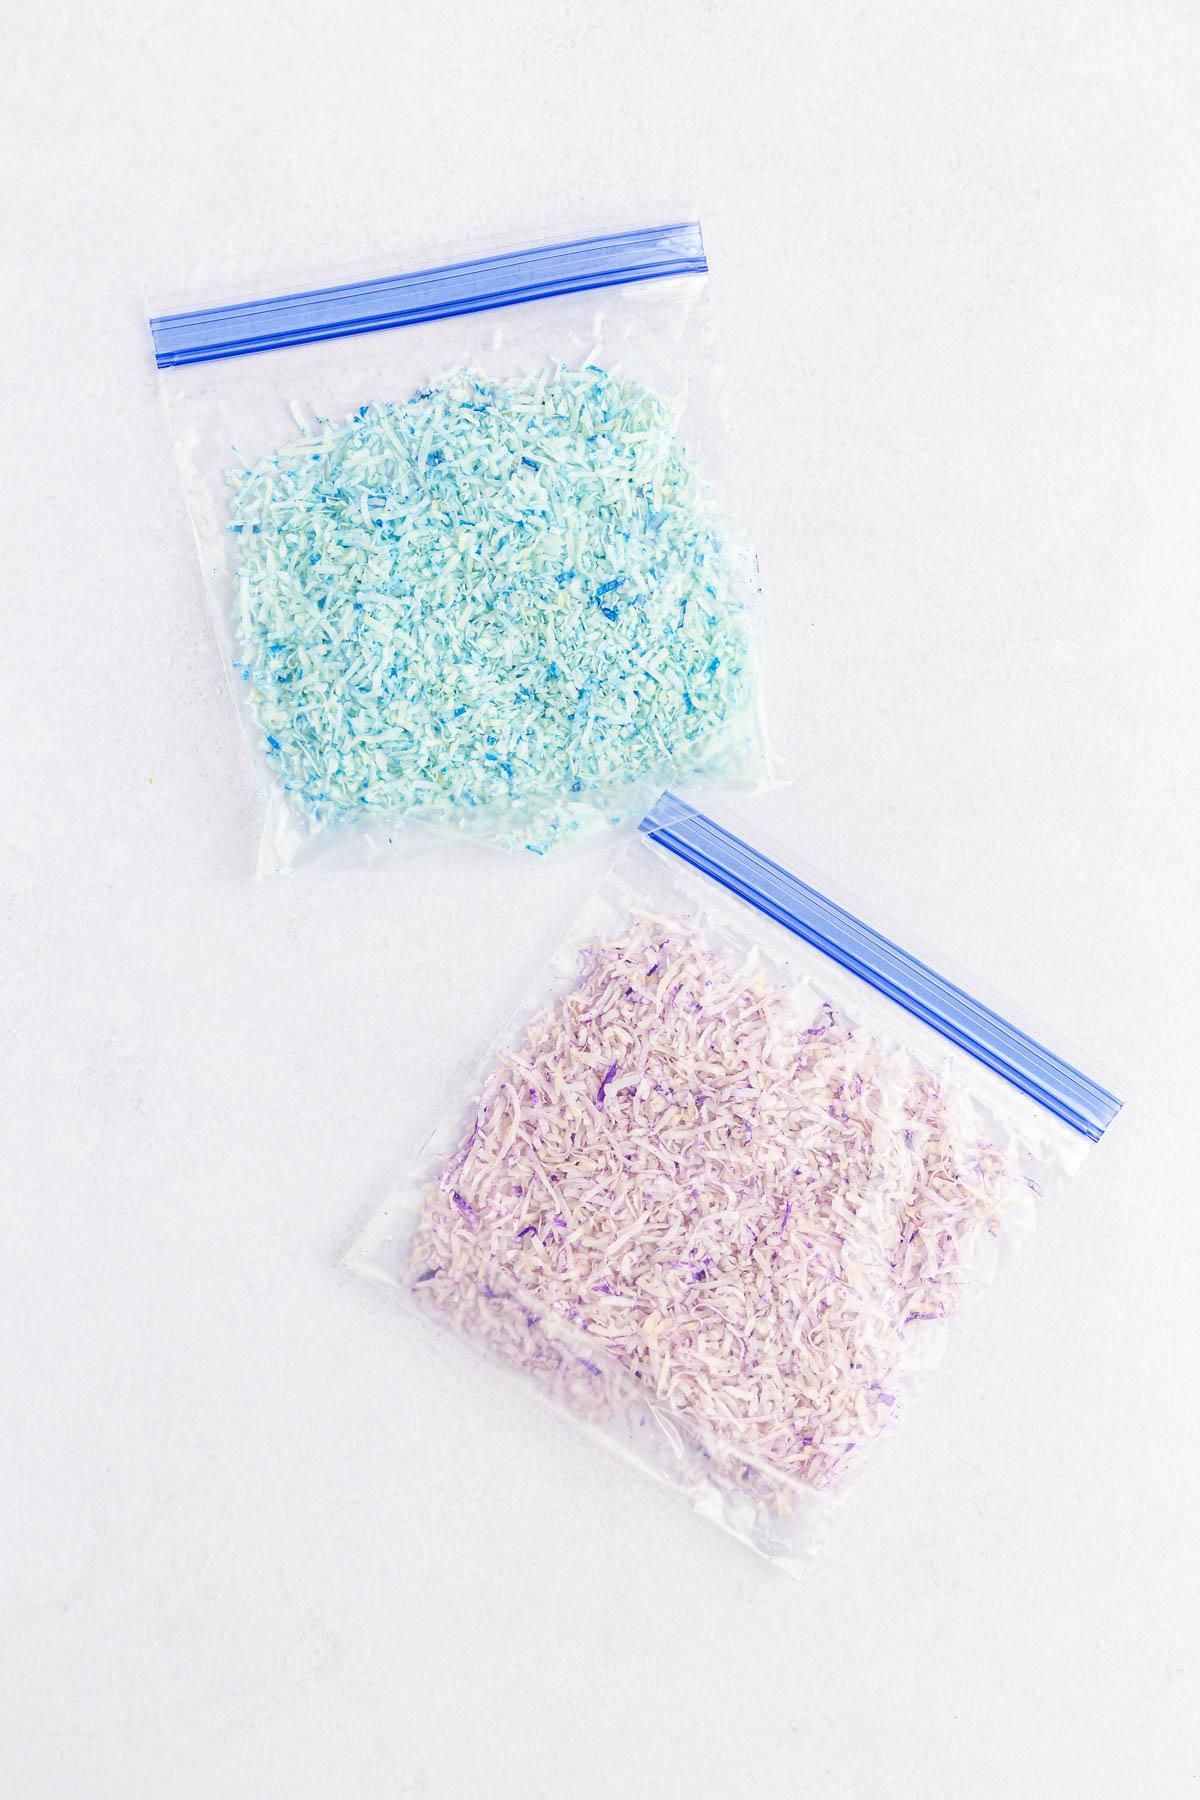 bags of colored shredded coconut